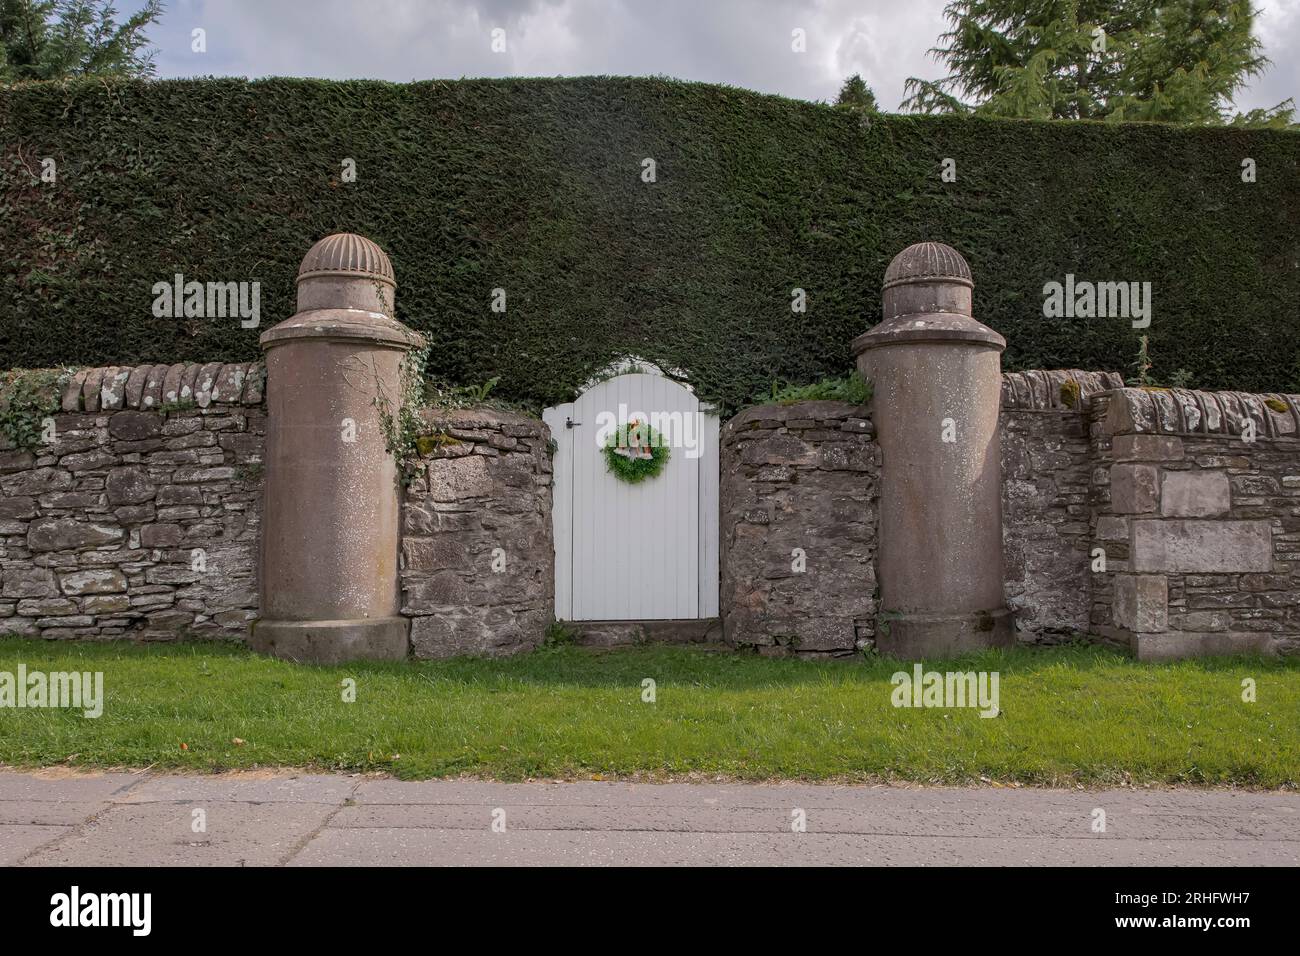 Unique white arched gate in a large conifer hedge which has a garland attached Stock Photo